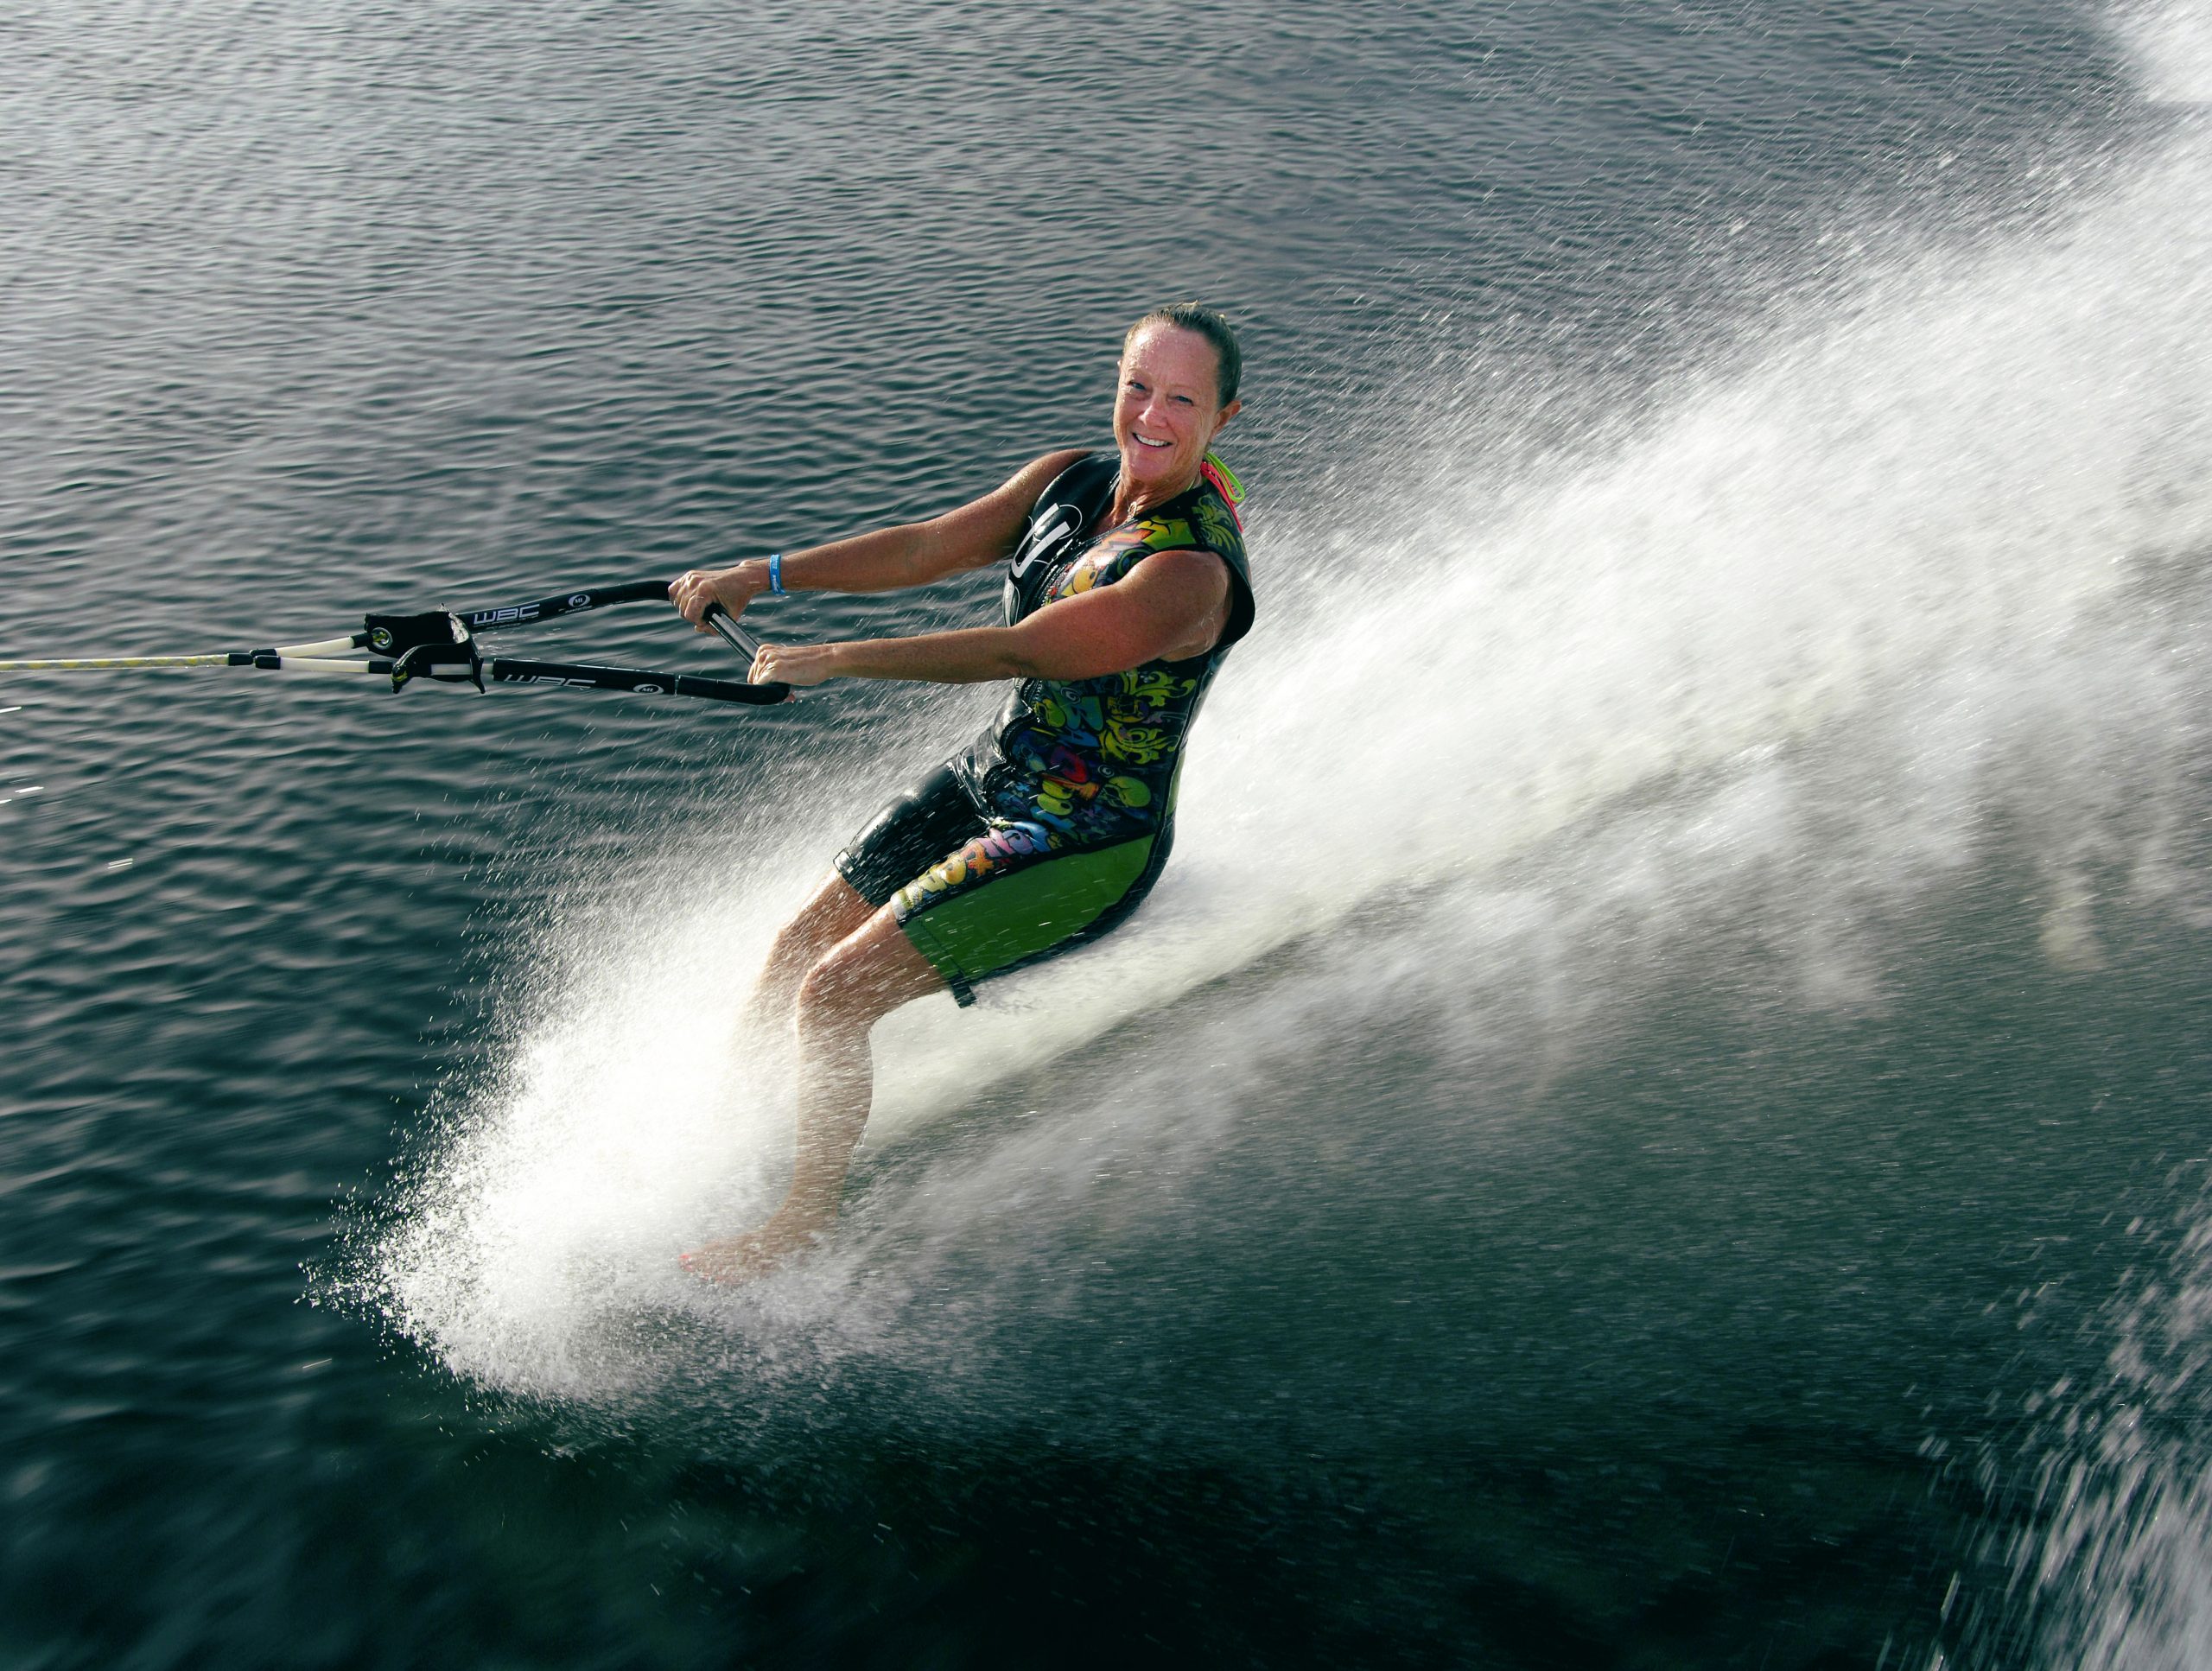 Mindy Acree started water skiing later in life and did not get serious about it until she was in her 50s. Photography by Lynn Novakofski